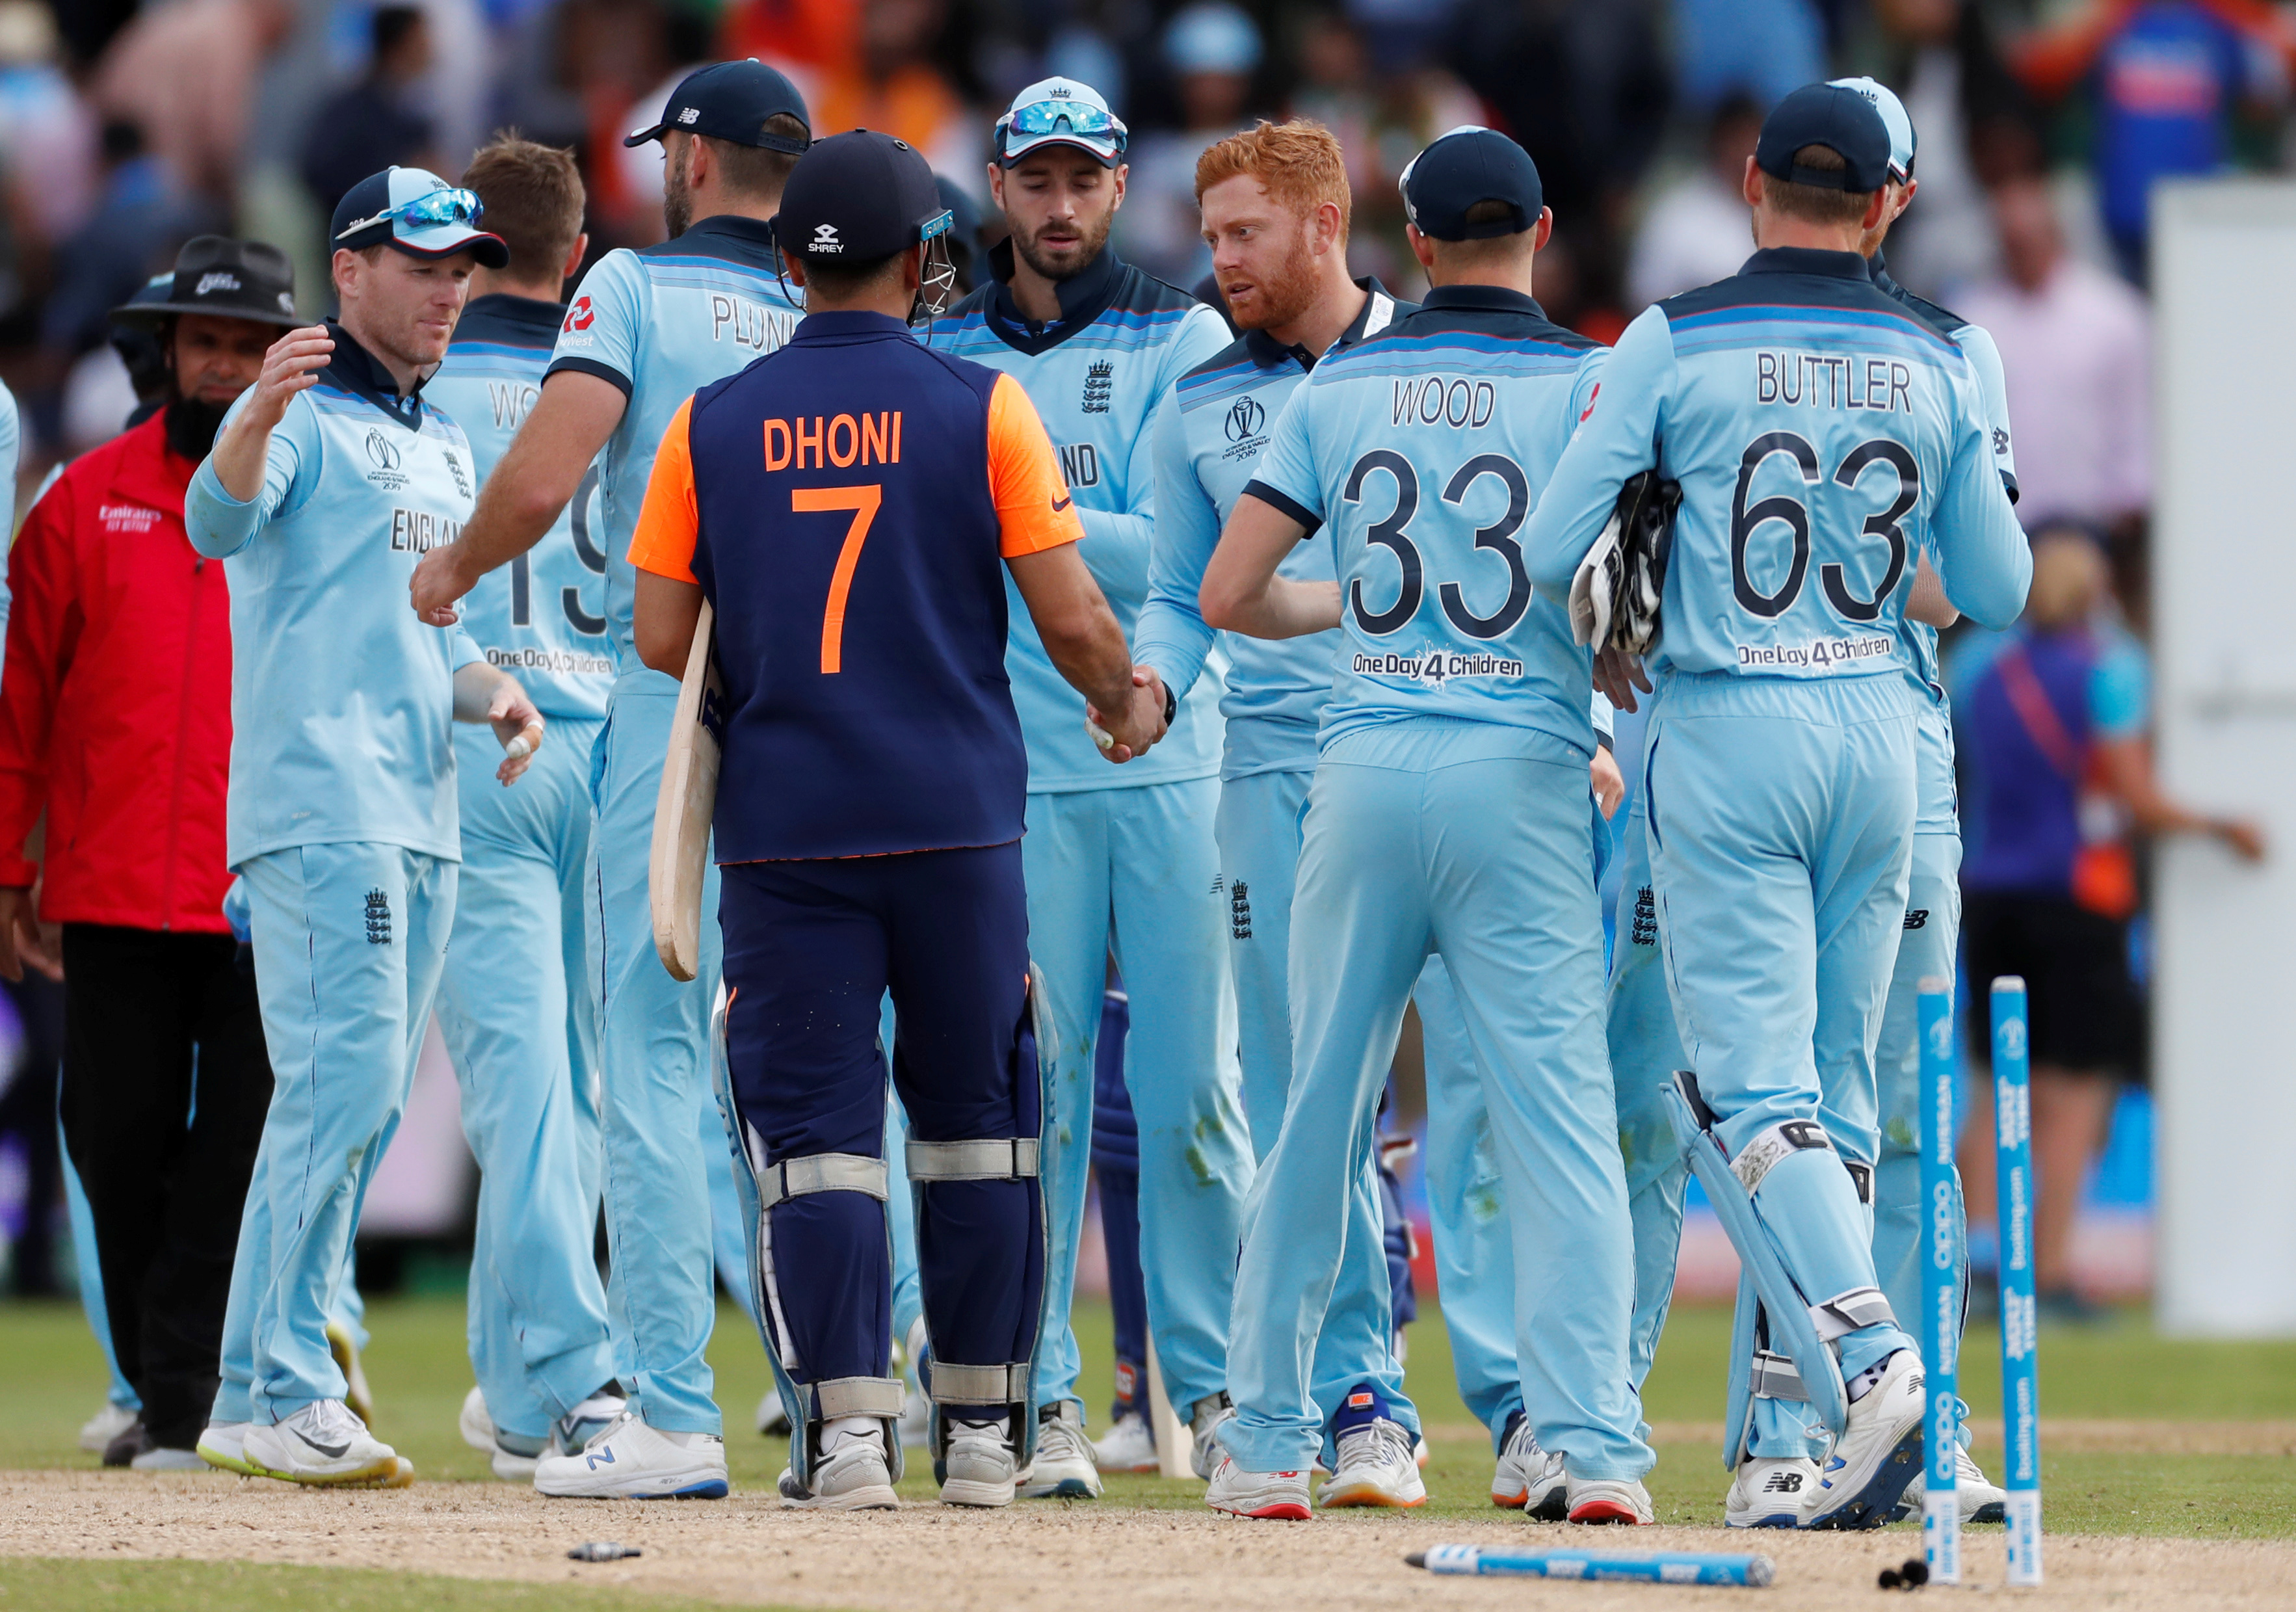 ICC World Cup: India suffer 31-run defeat against England - GG2